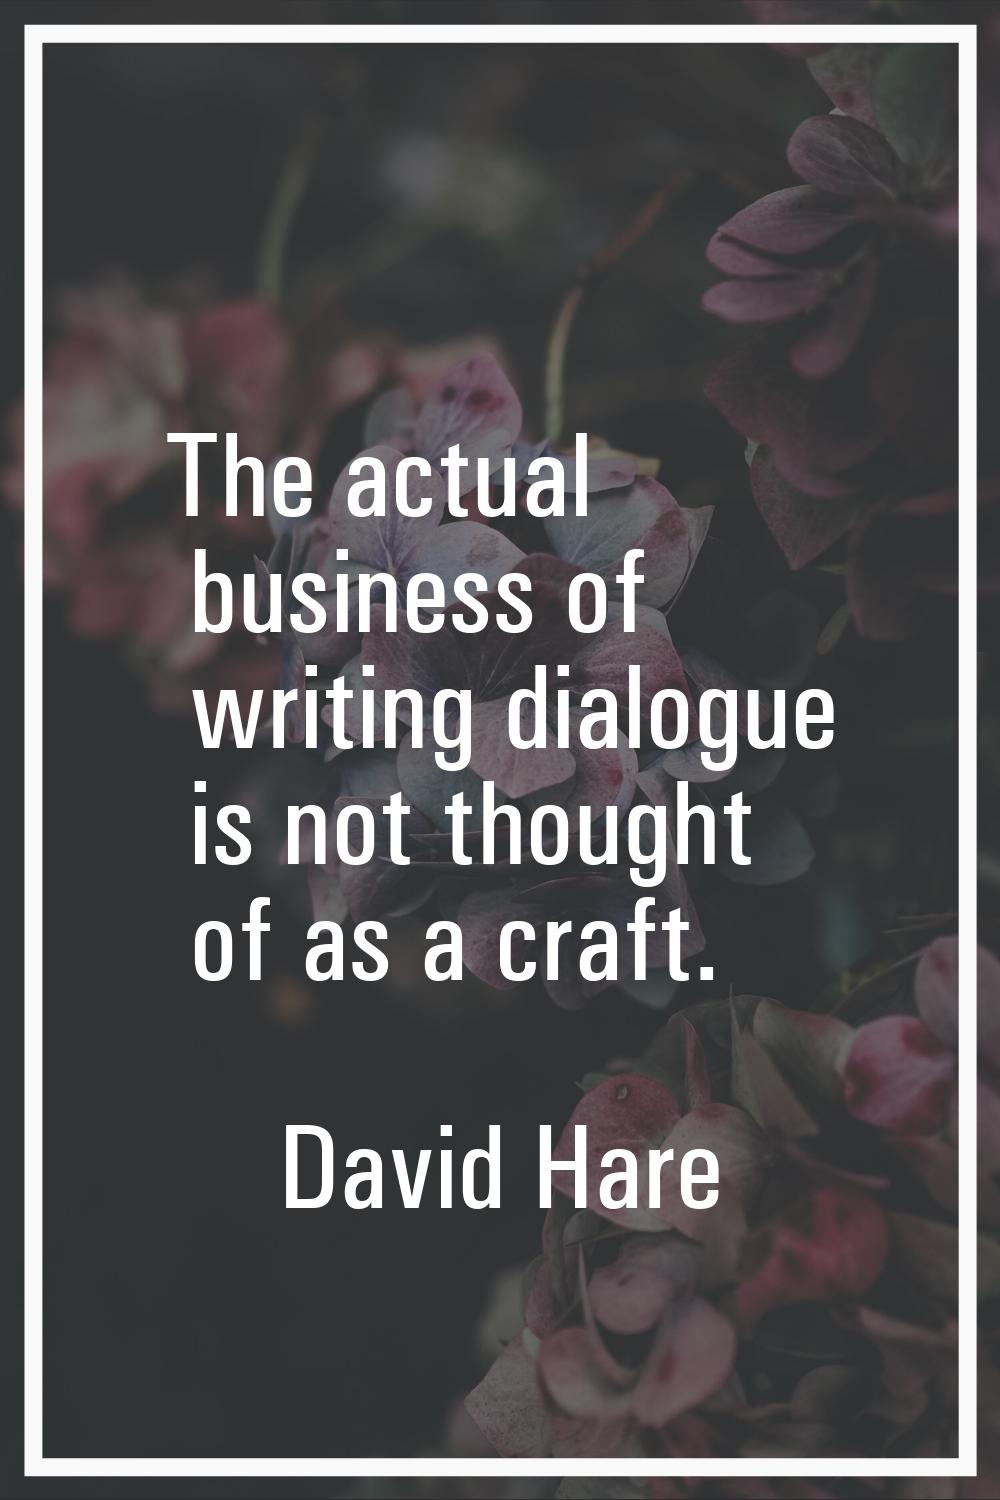 The actual business of writing dialogue is not thought of as a craft.